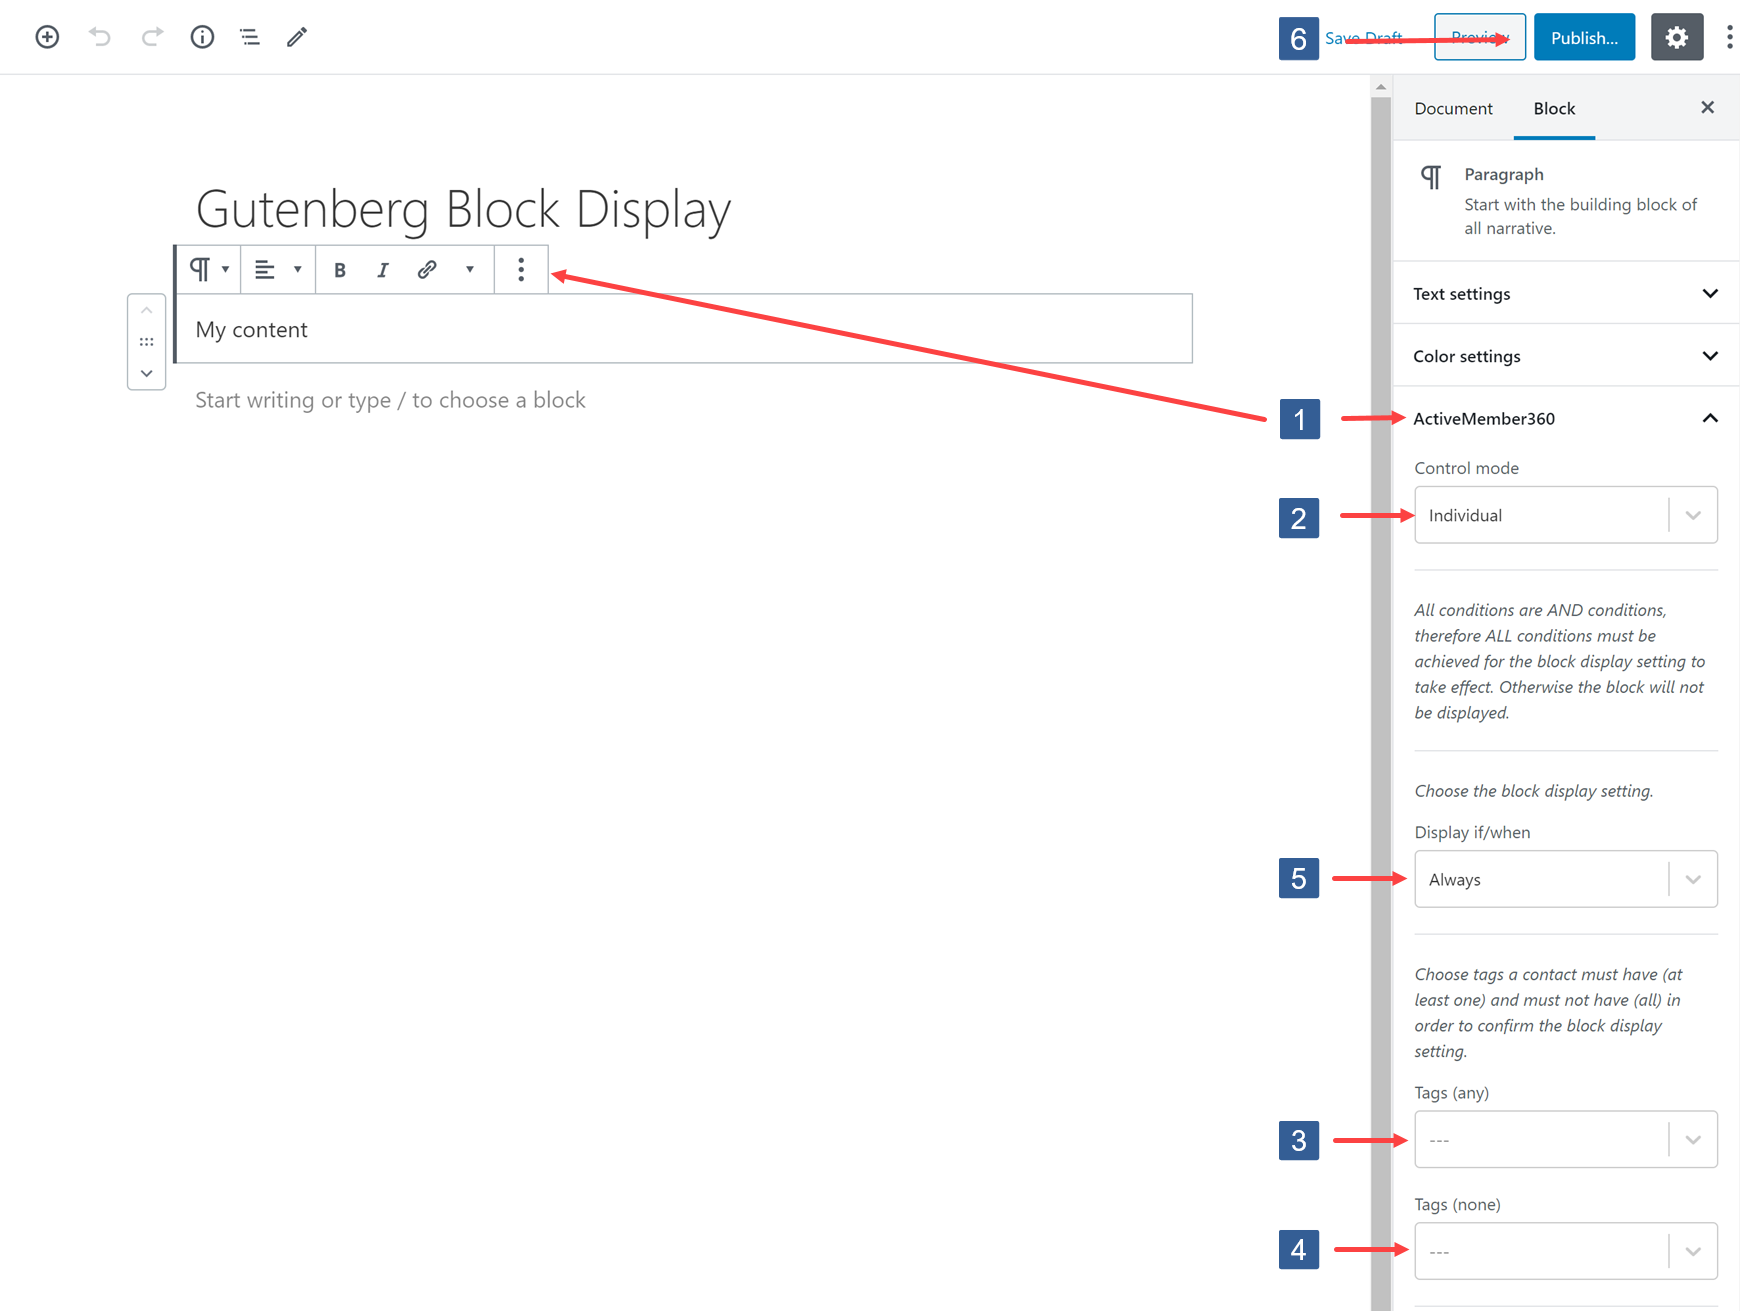 Steps for specifying display conditions for Block Editor block based upon contact tags